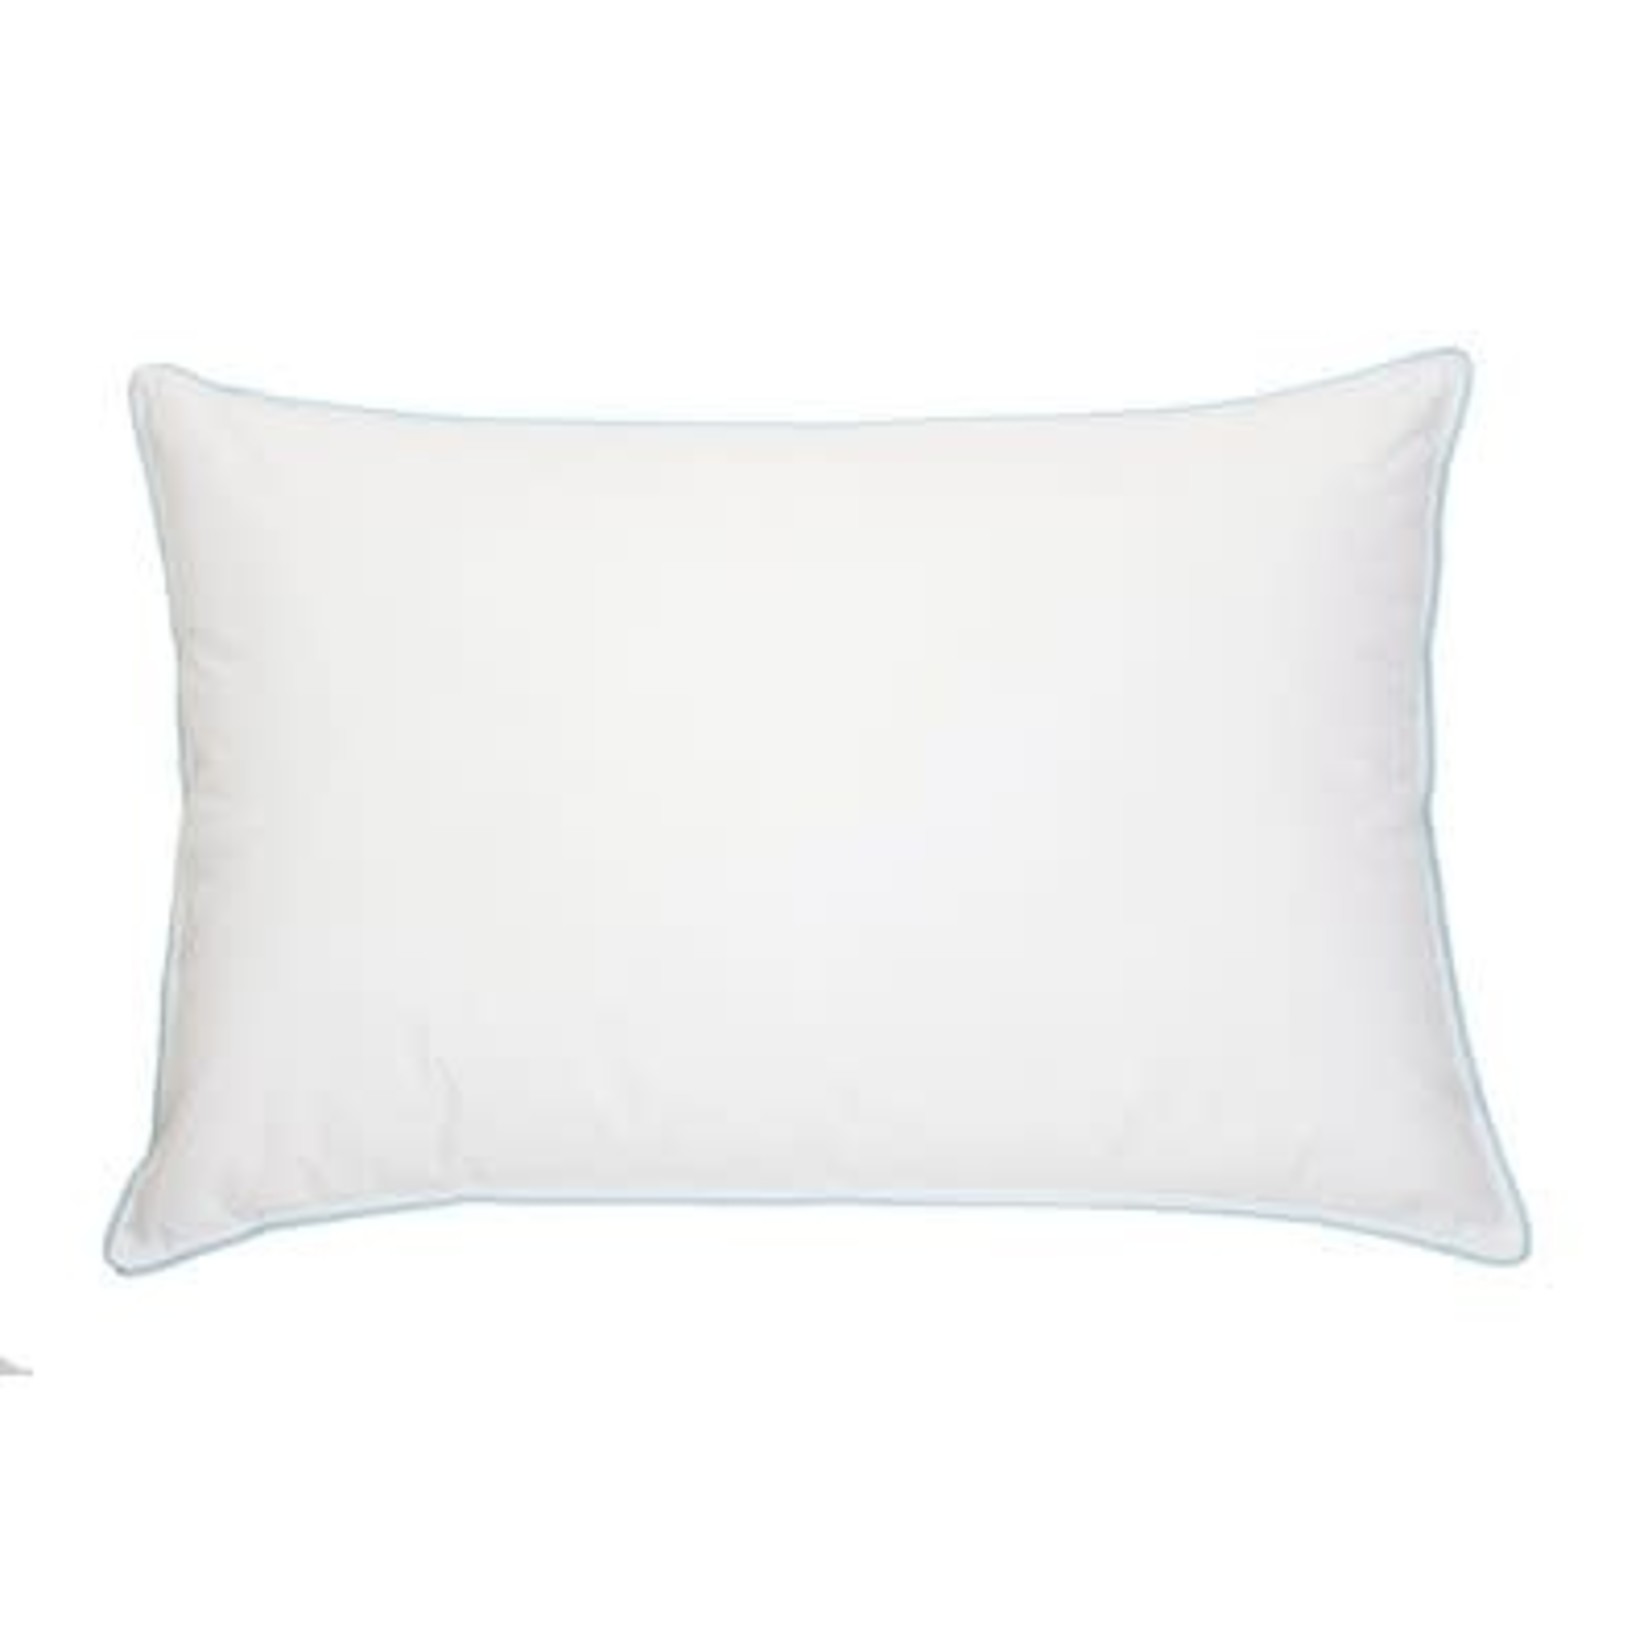 Brunelli Pillow King size Microgel